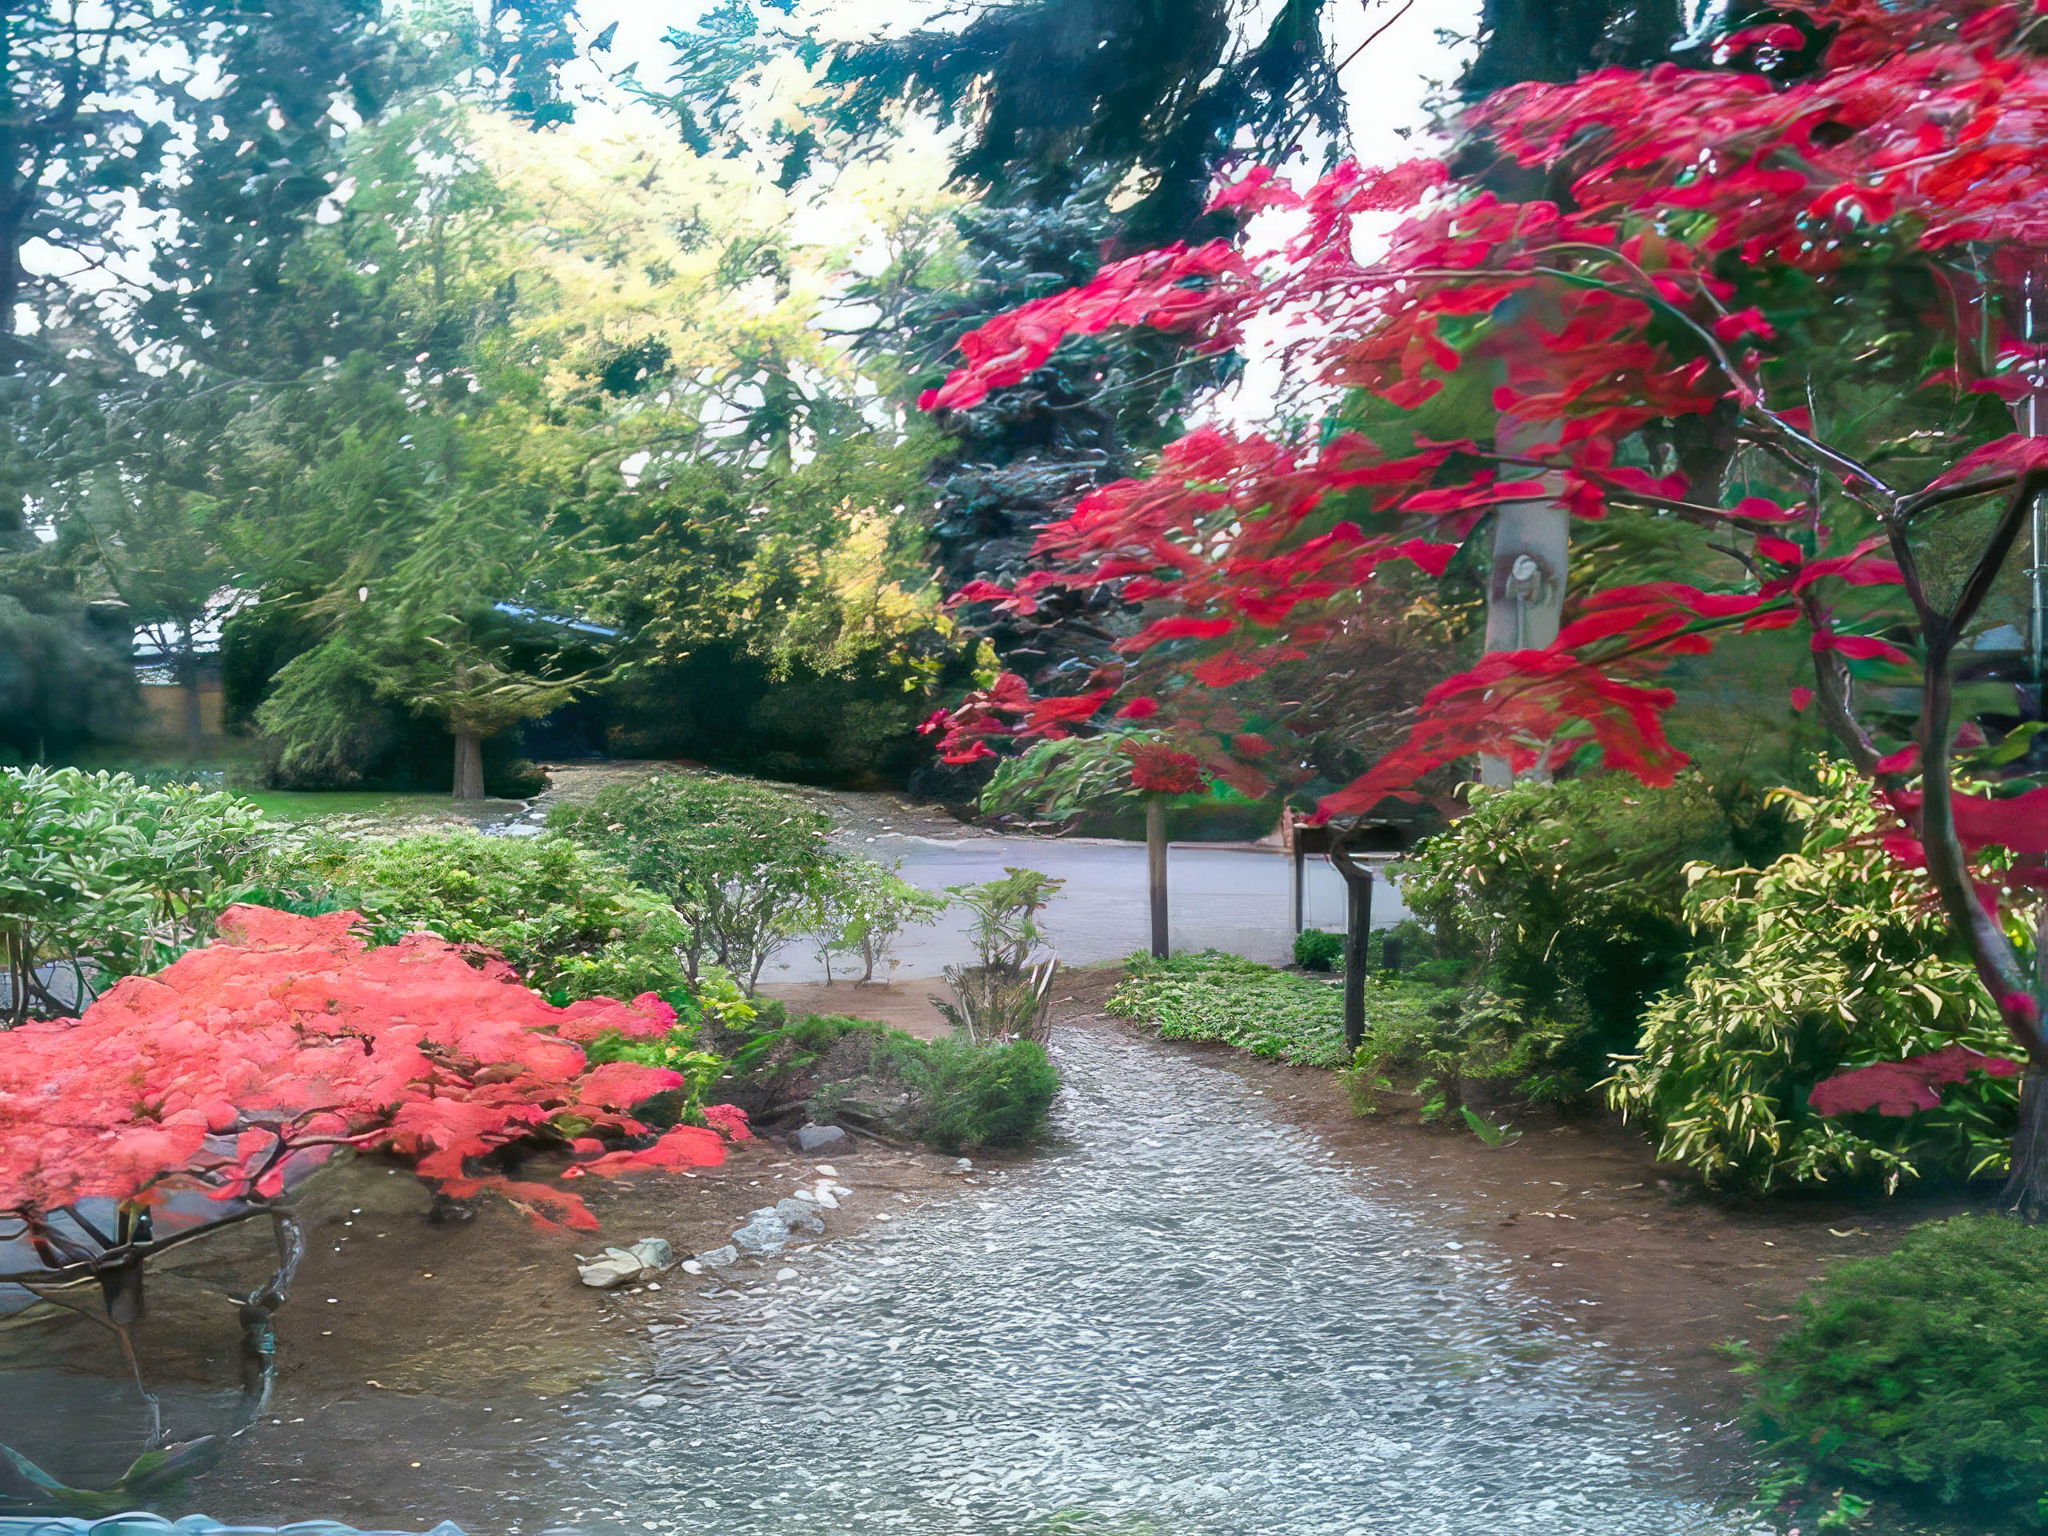 In the fall, the Japanese maple trees transform into dazzling displays of crimson reds, like fiery jewels against the sky.